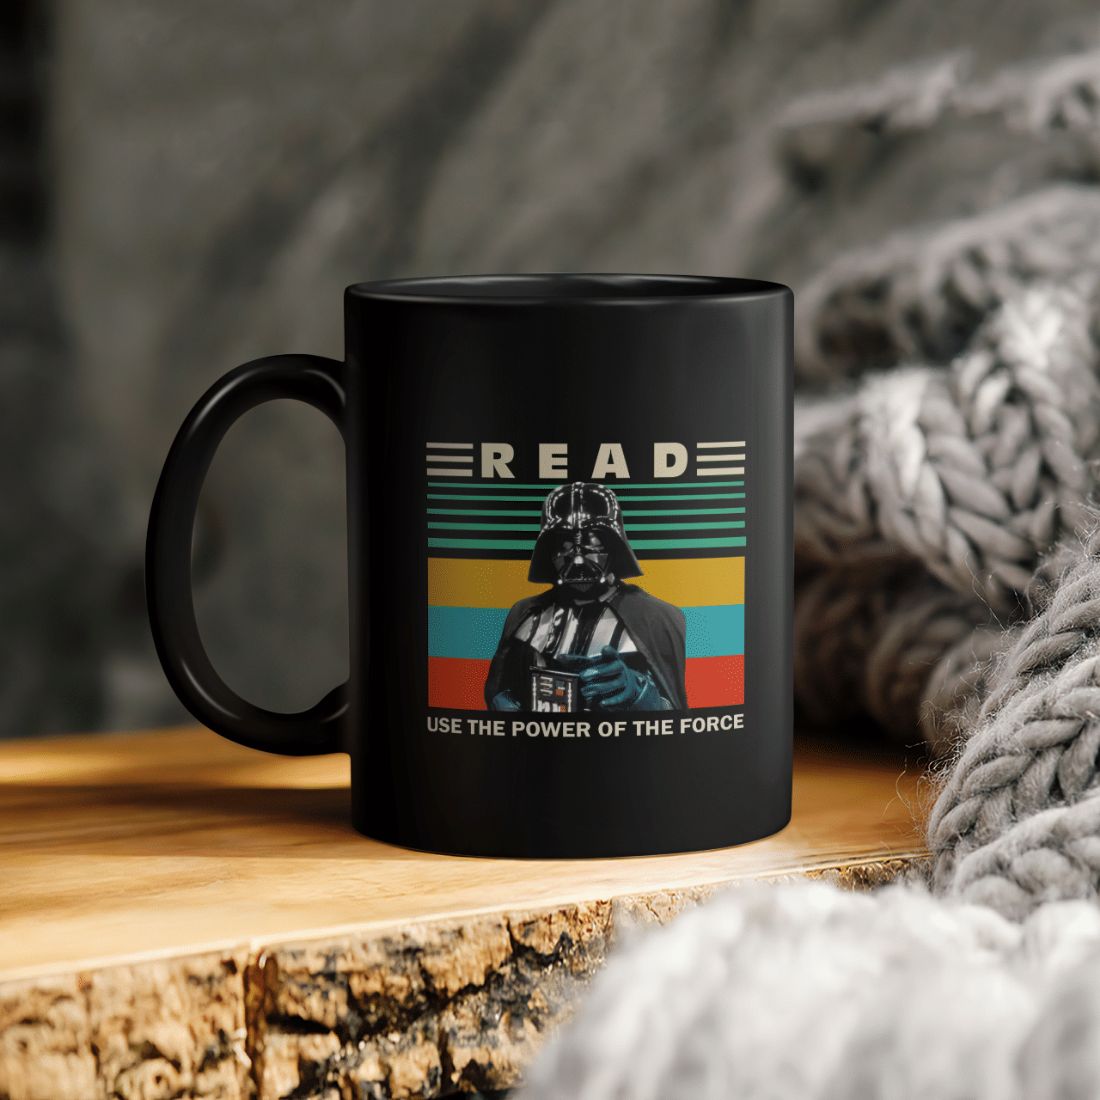 https://teepital.com/wp-content/uploads/2022/04/star-wars-darth-vader-read-use-the-power-of-the-force-ceramic-coffee-mugn5lrg.jpg